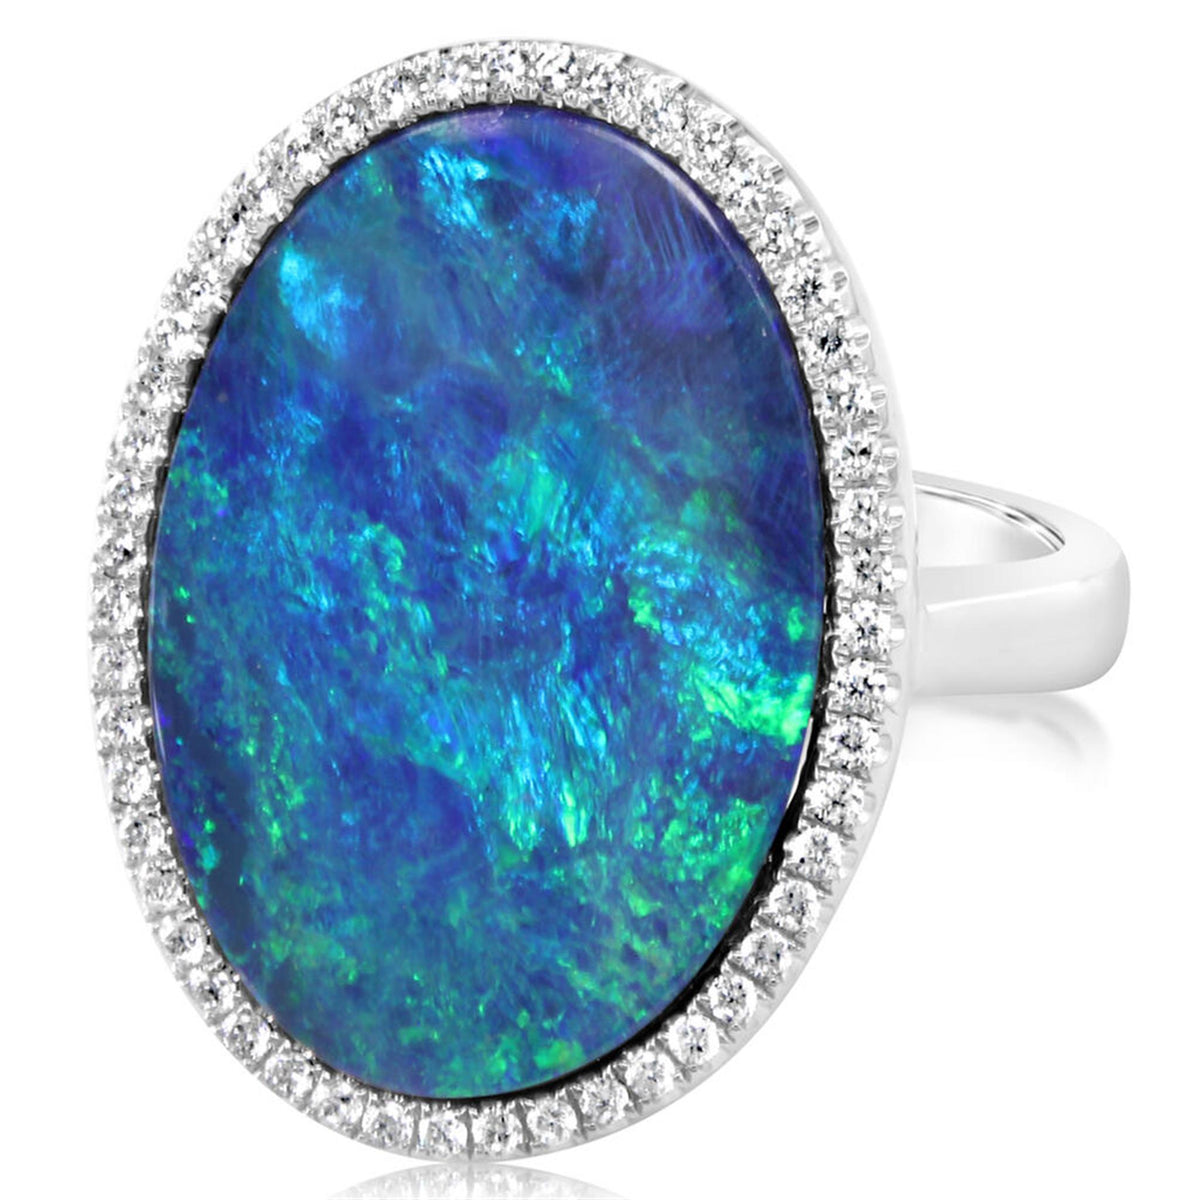 14Kt White Gold Halo Ring With 8.62ct Australian Opal